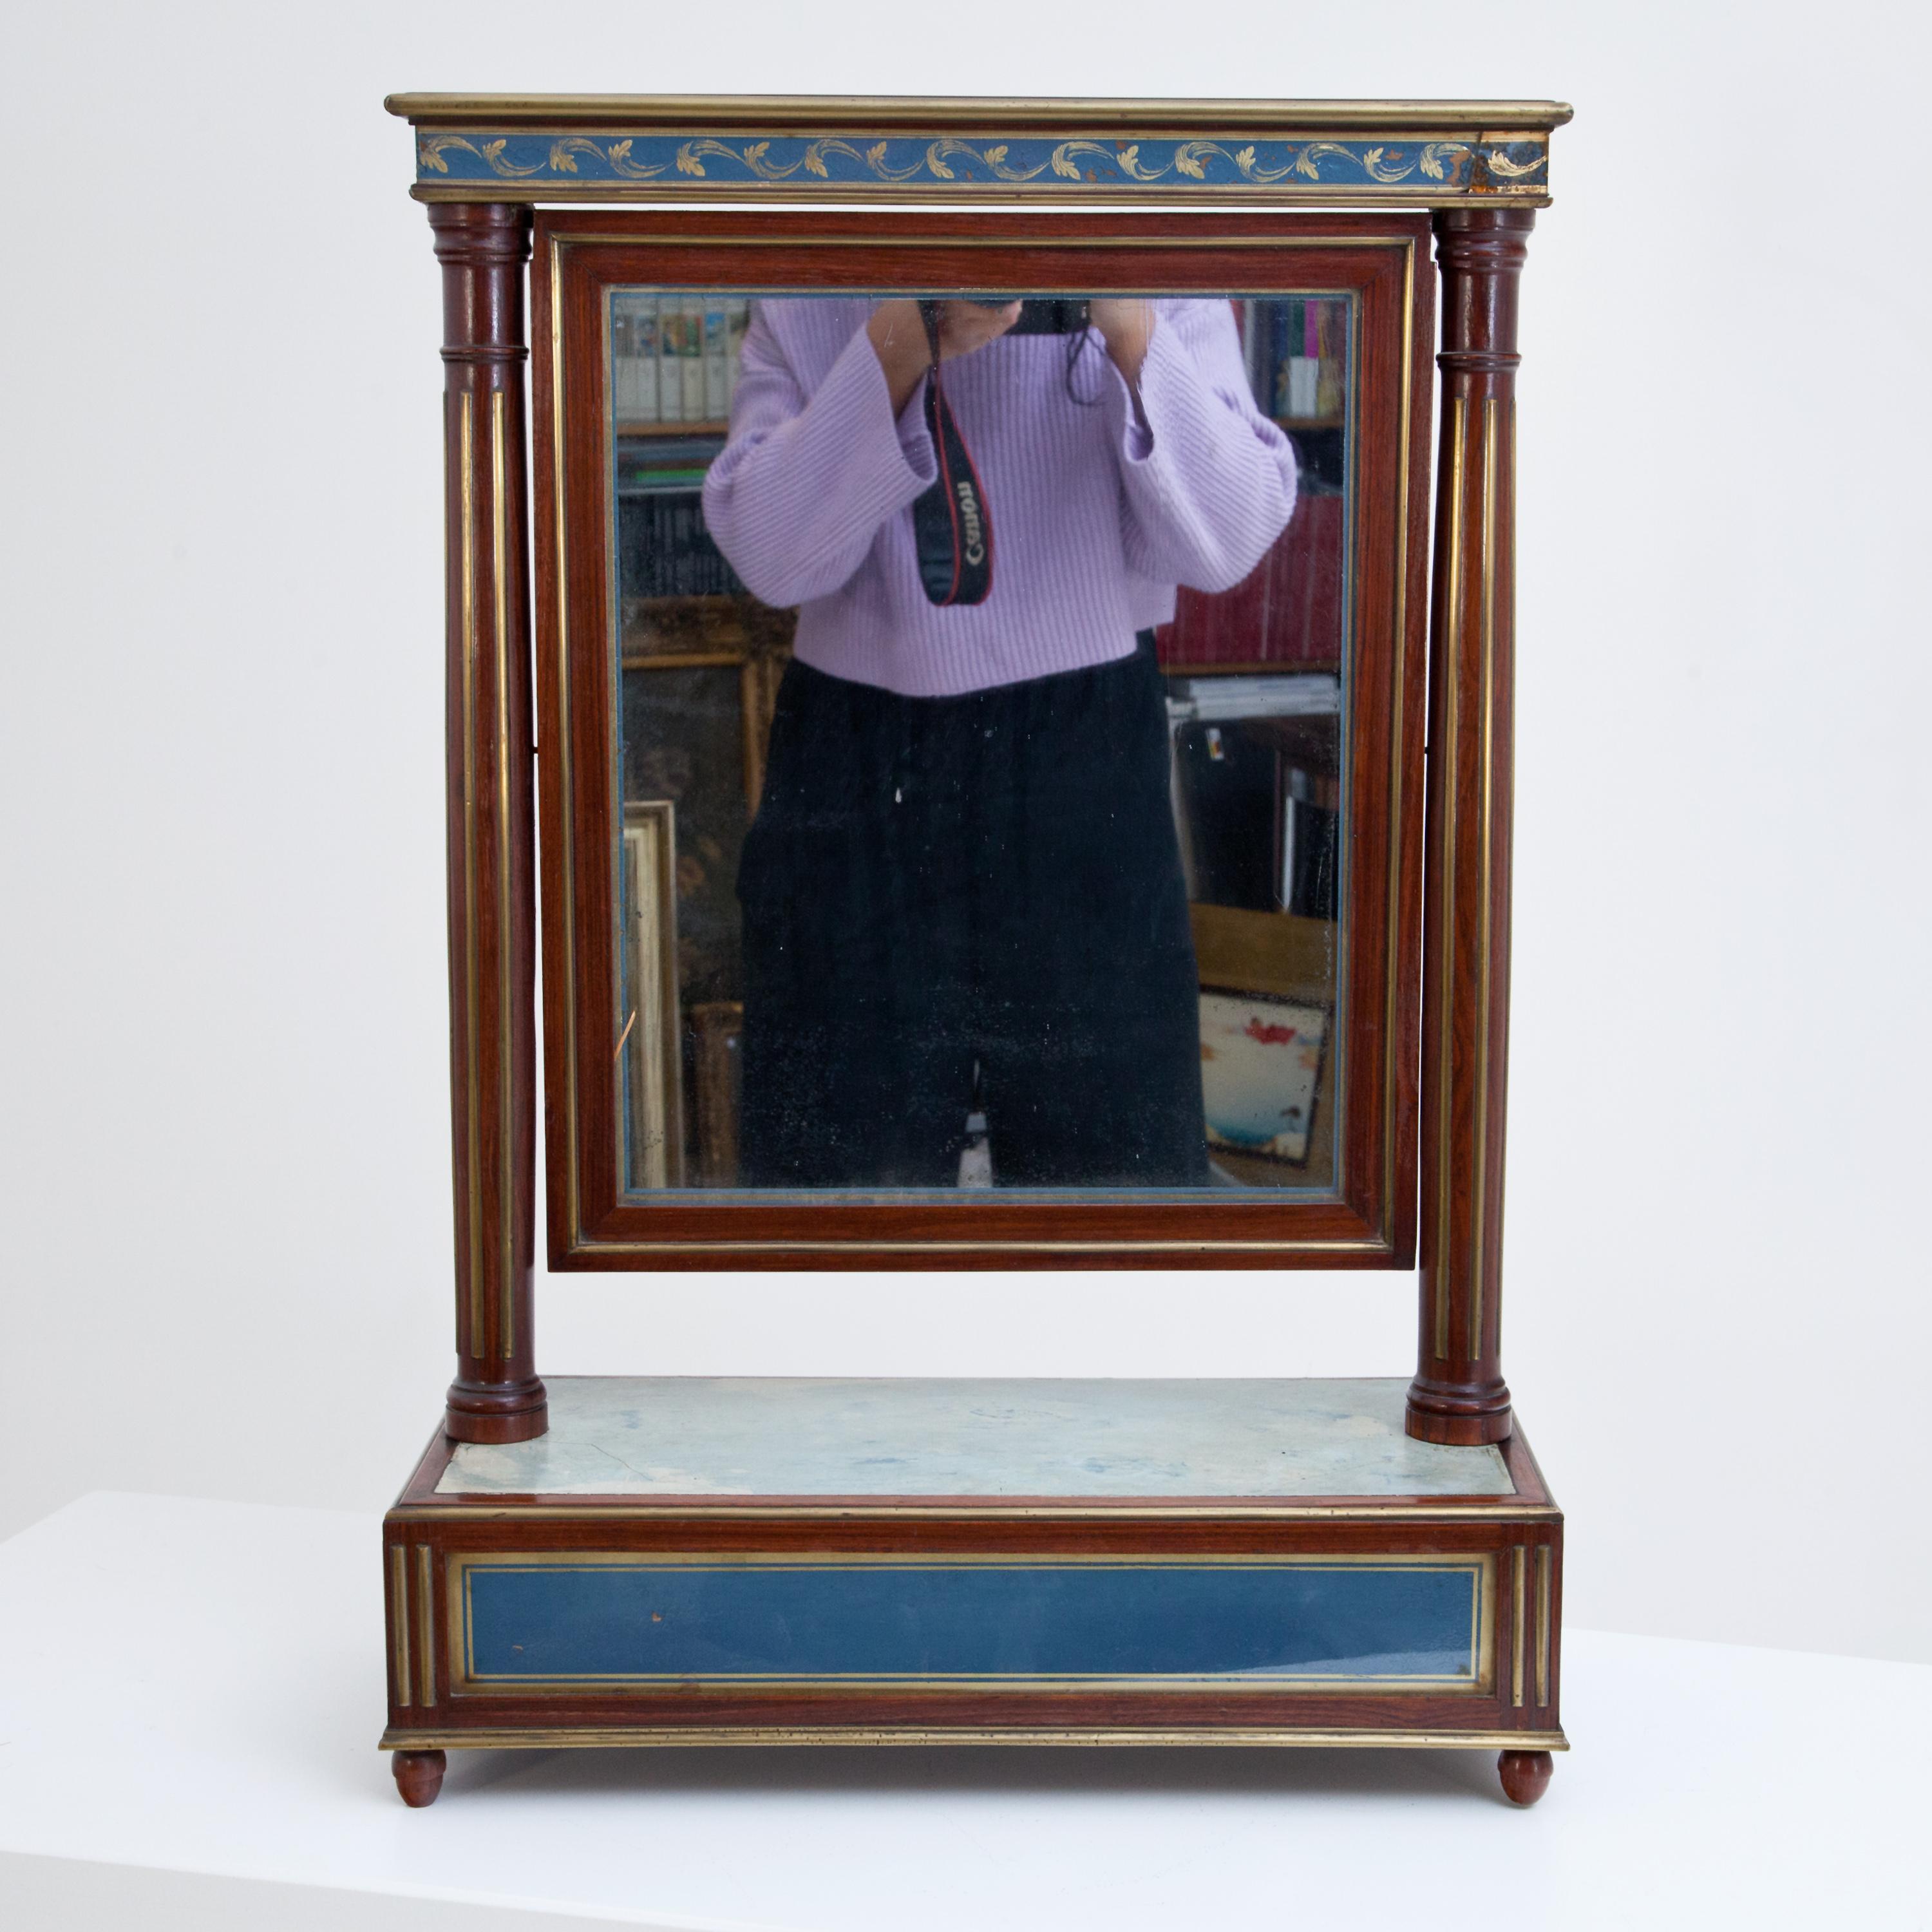 Neoclassical Mahogany Table Mirror with Verre Églomisé Inlays, St. Petersburg, circa 1800 For Sale